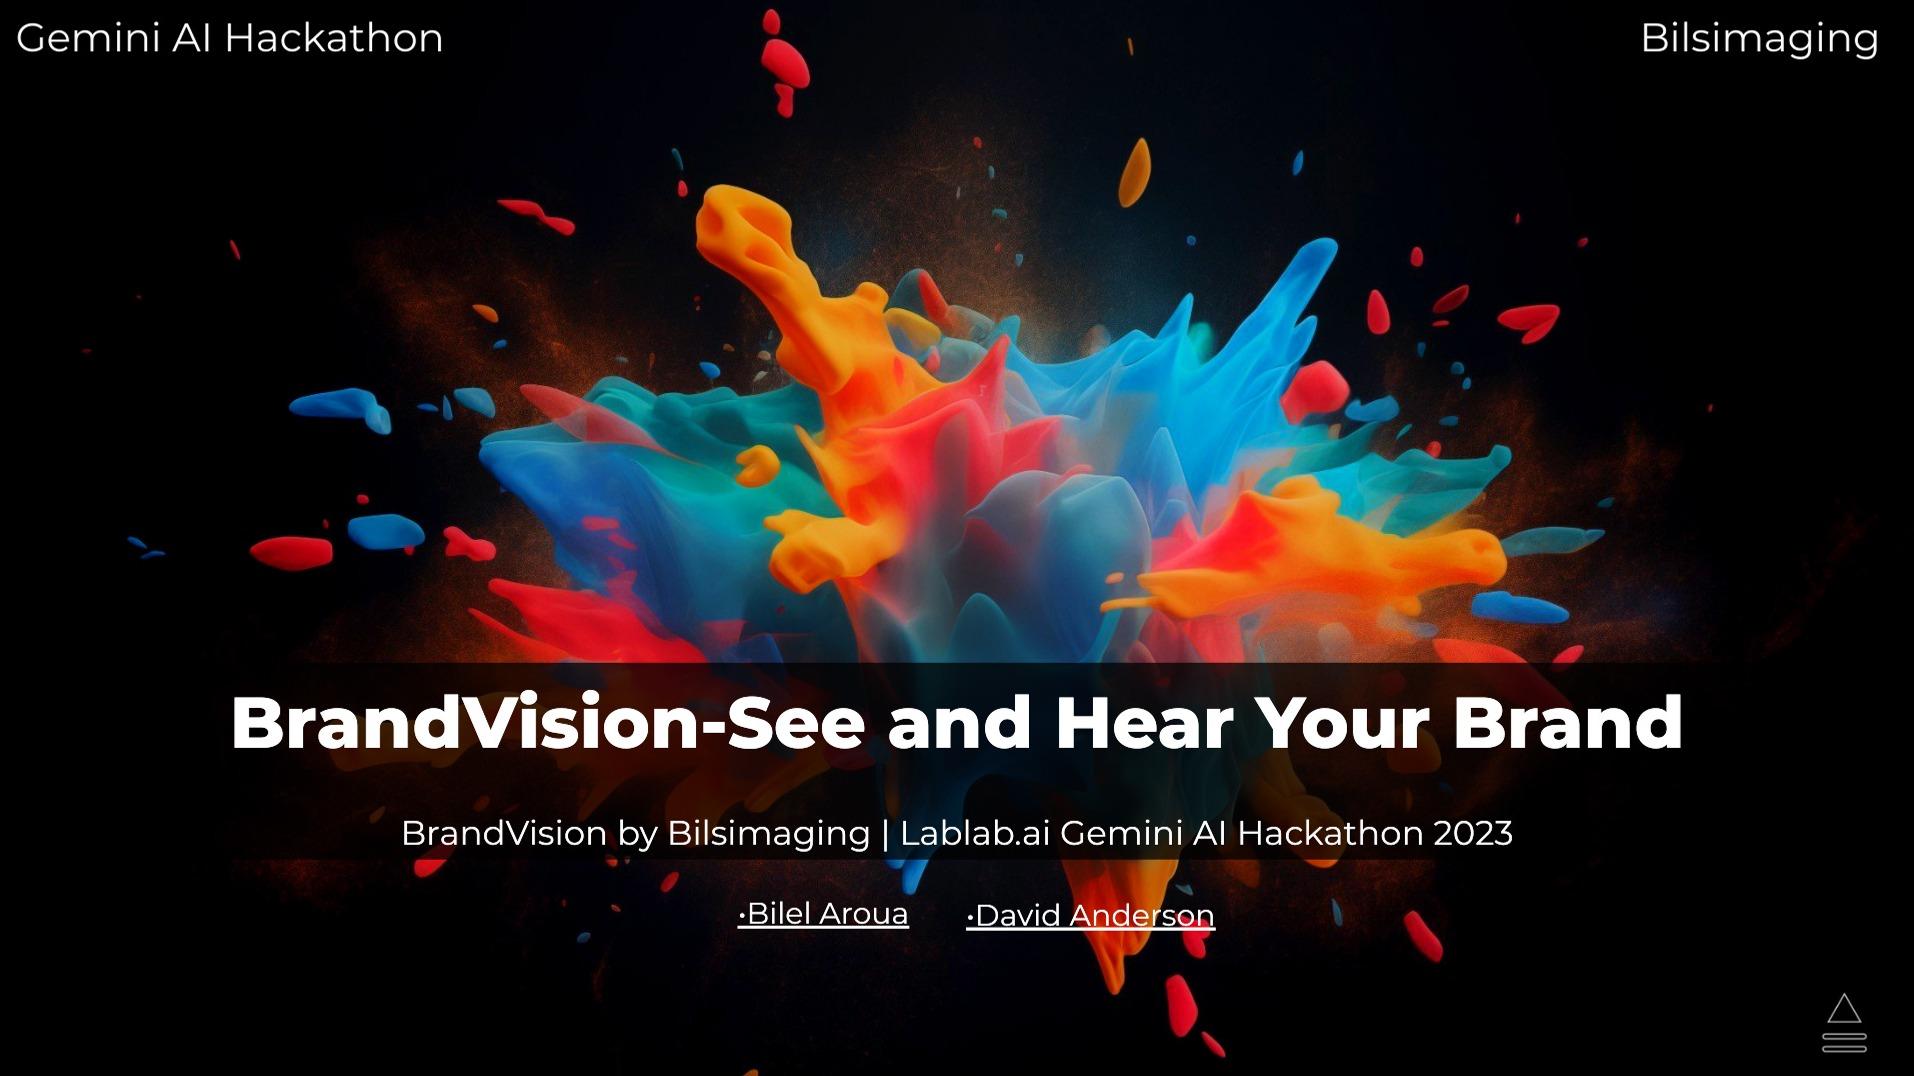 Brand Vision-See and Hear Your Brand